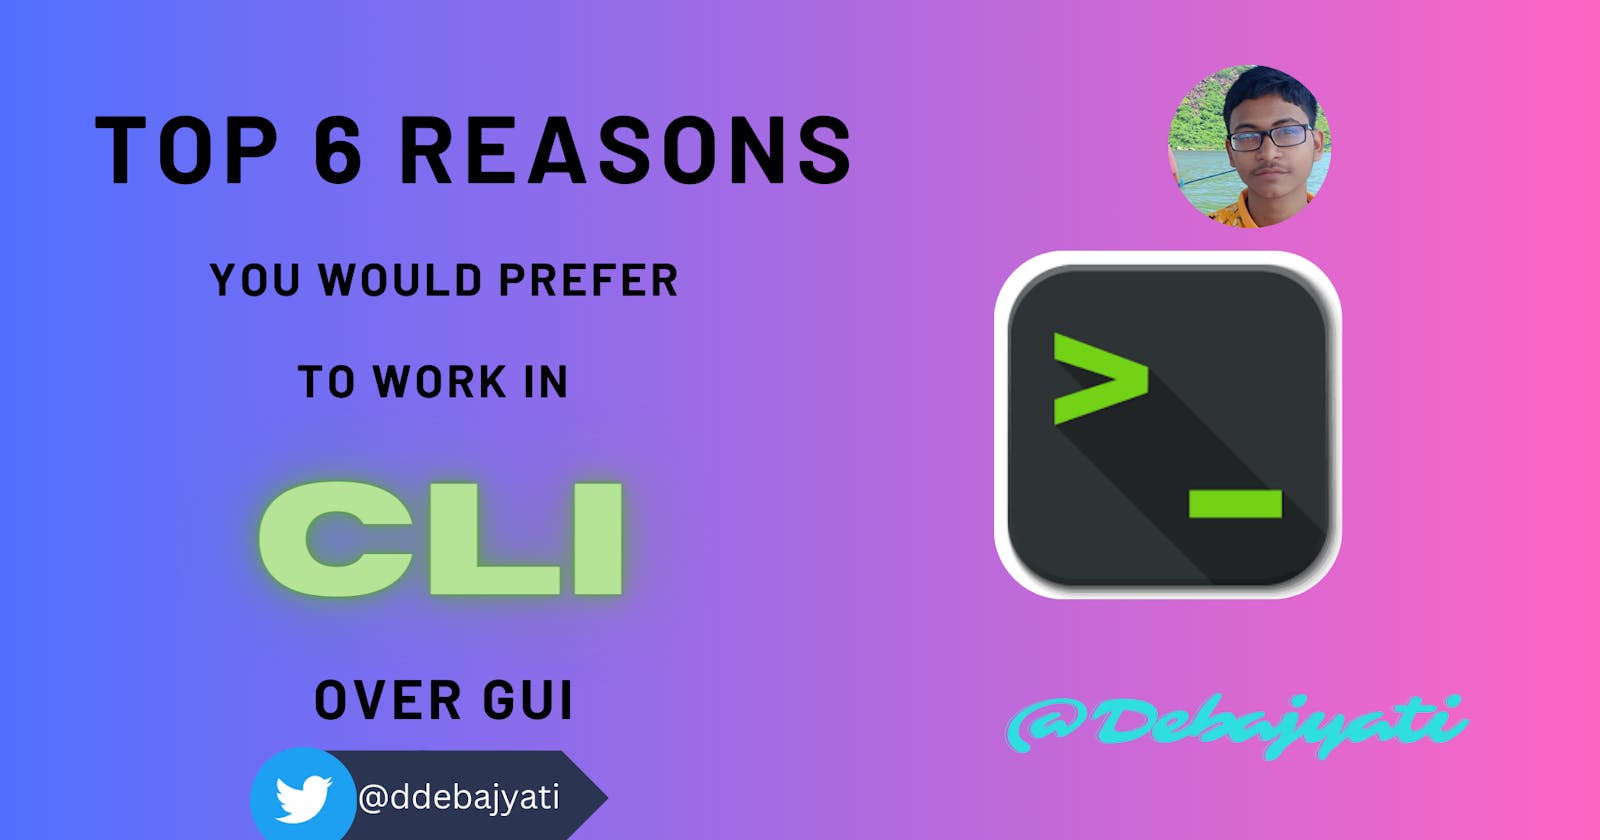 Why should you choose CLI over GUI?